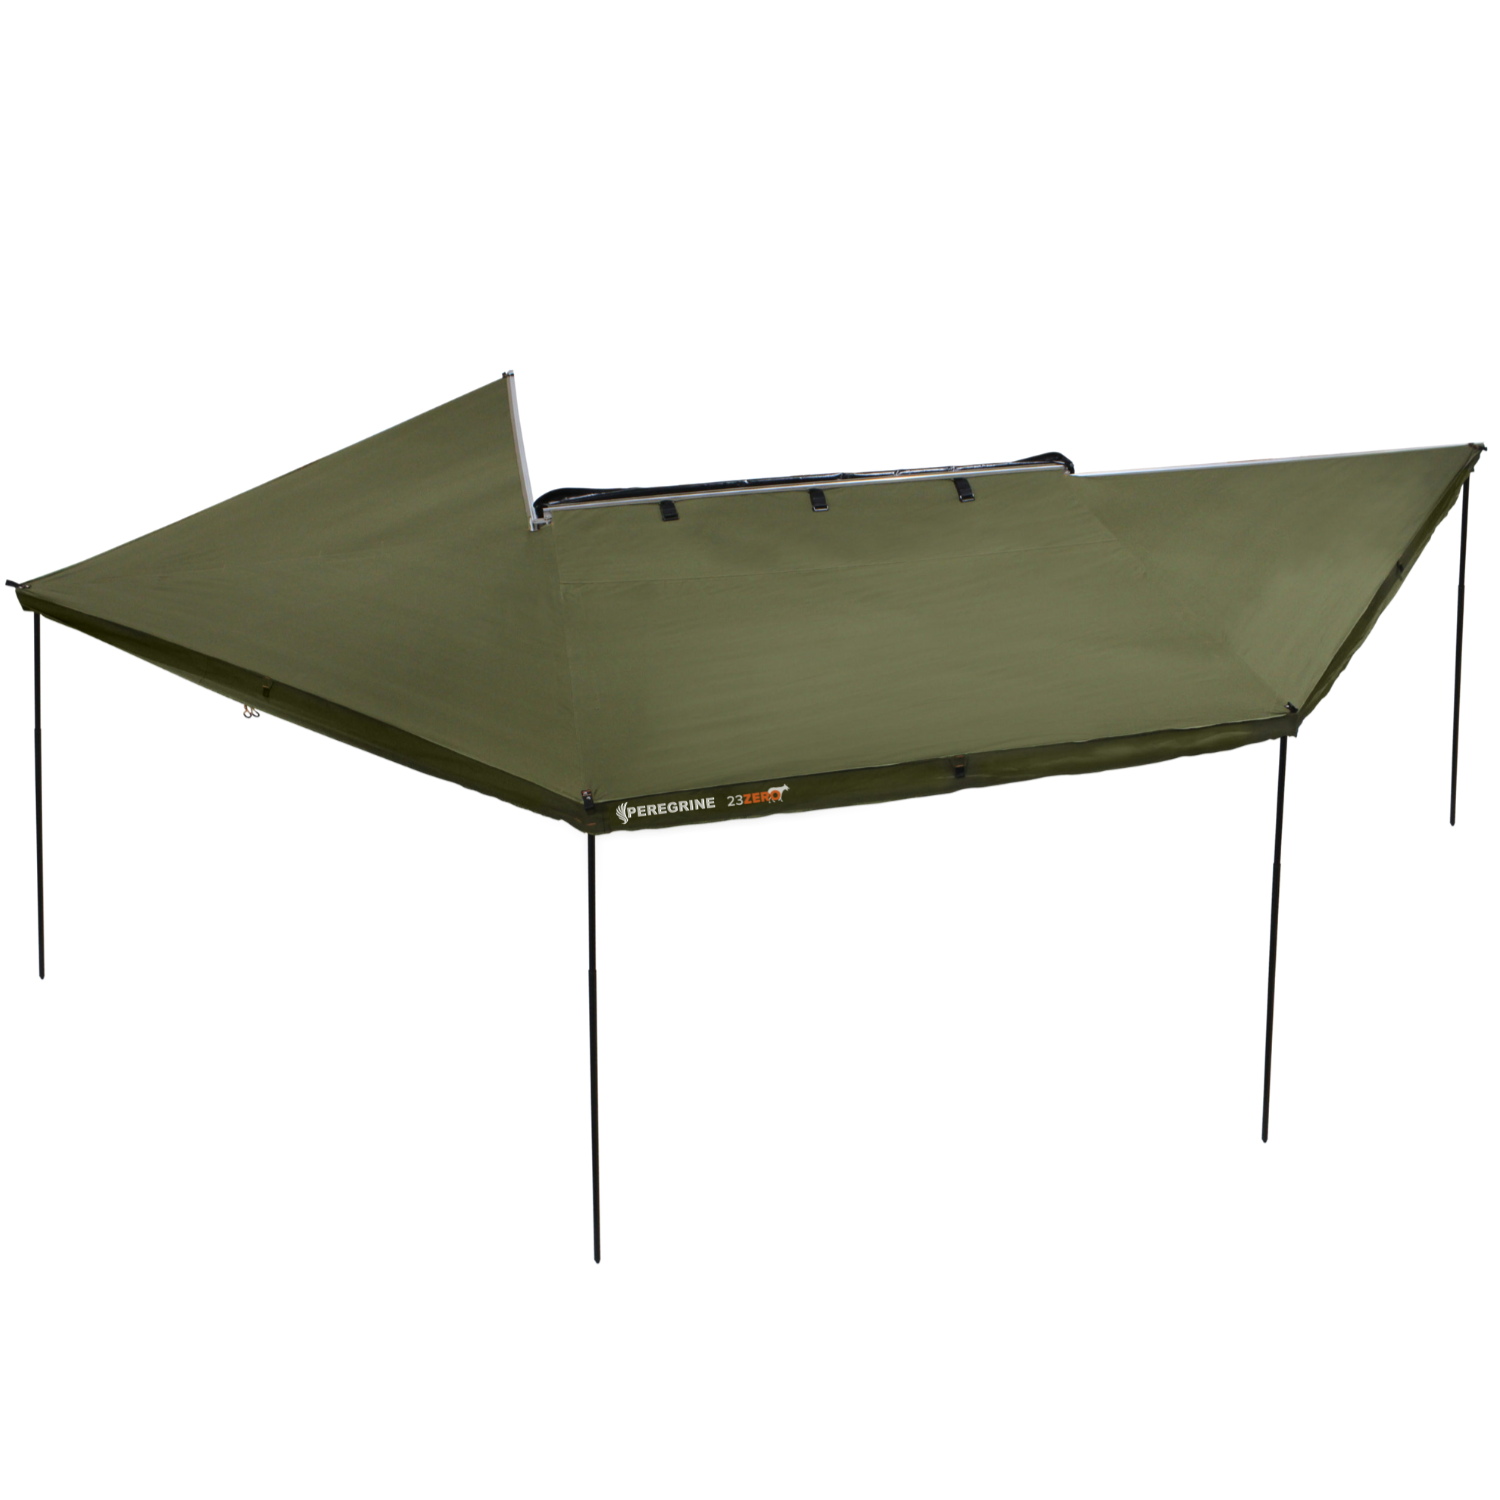 23ZERO Peregrine 270° Awning - Right (Passenger's Side) with LST